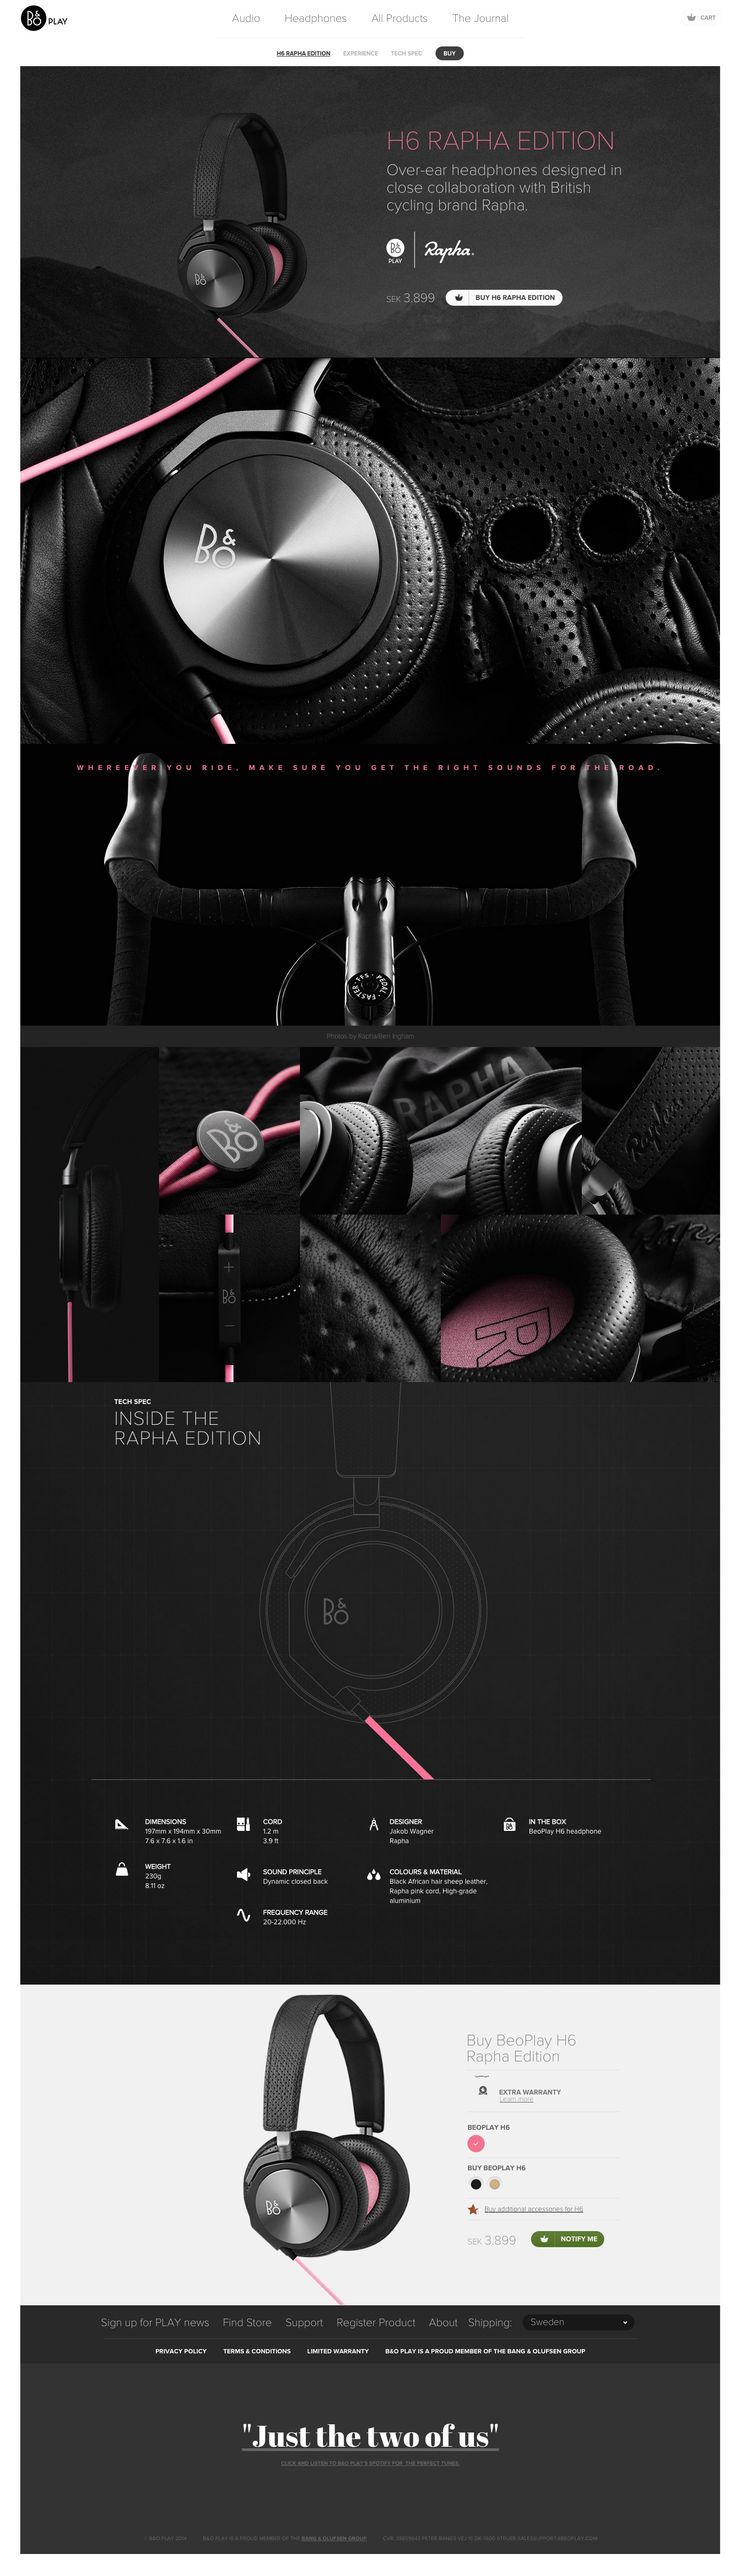 Beoplay H6 Rapha Edition by Spring/Summer